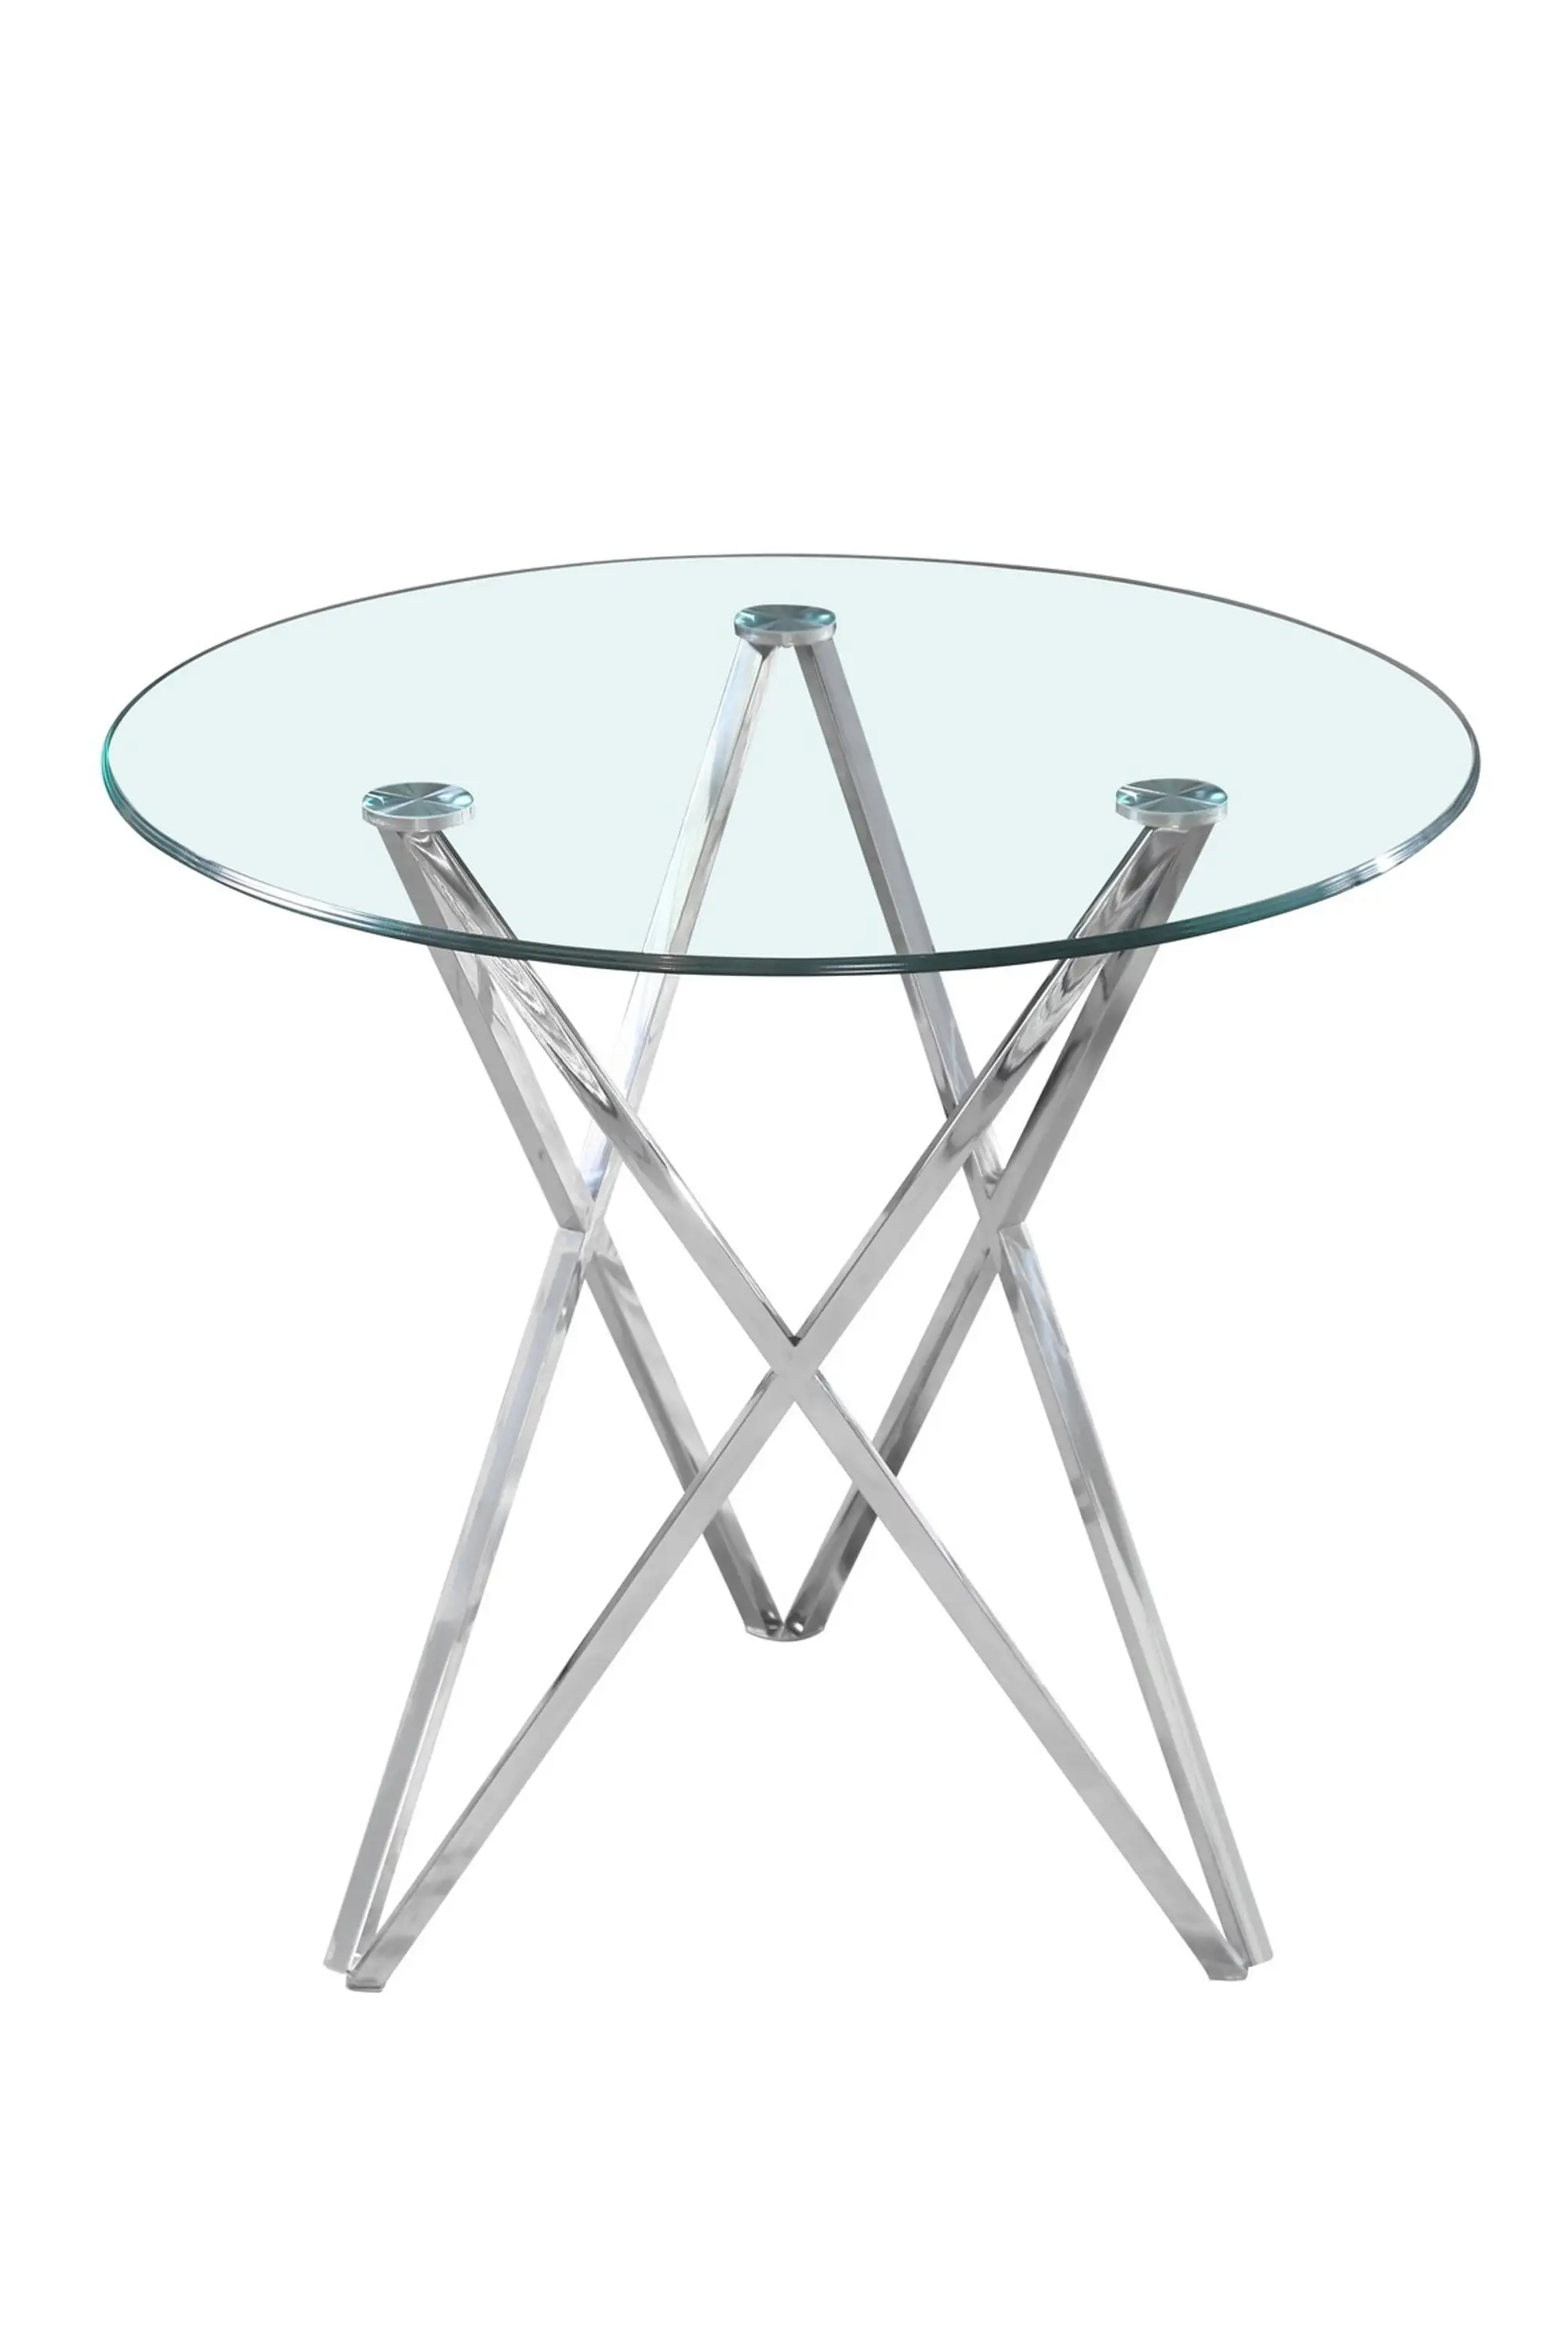 Round Tempered Glass Dining Table - Buy Round Dining Table,Dining Table ...